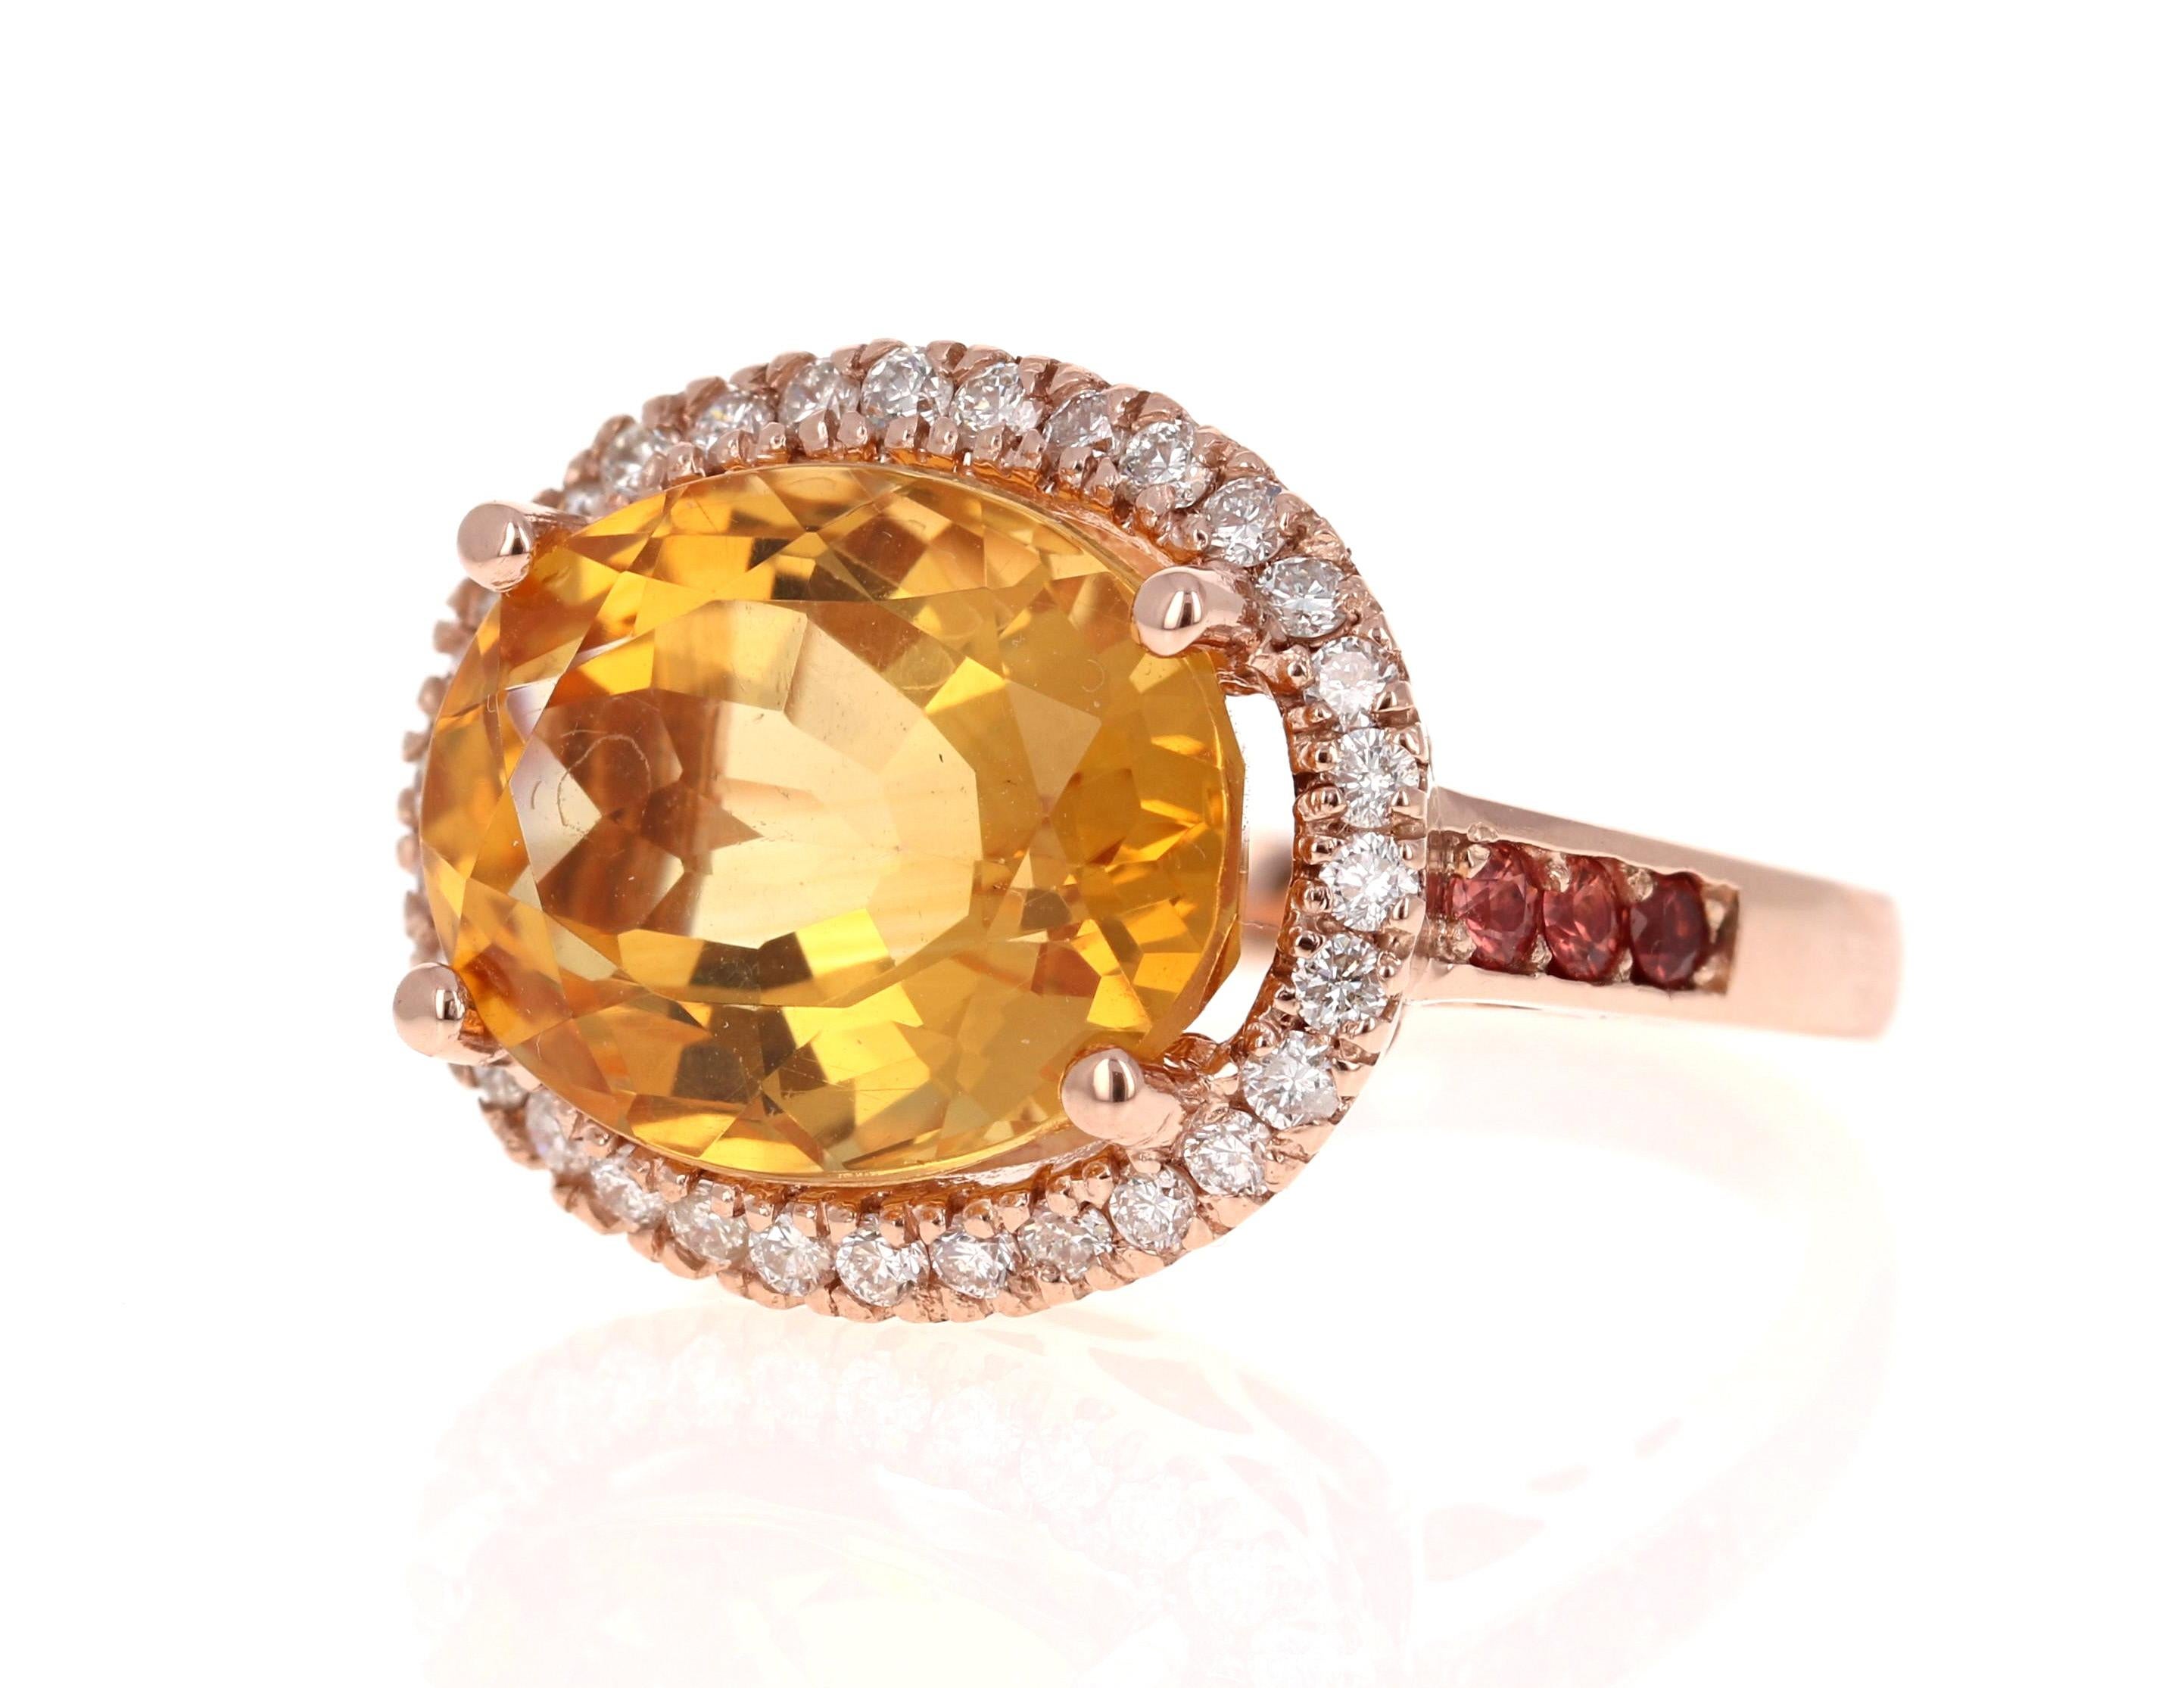 A Stunning and uniquely designed beauty to say the least! 

This magnificent ring has a bold Oval Cut Citrine that is blazing yellow! It weighs 9.90 Carats and is surrounded by a beautiful halo of 30 Round Cut Diamonds that weigh 0.56 Carats.